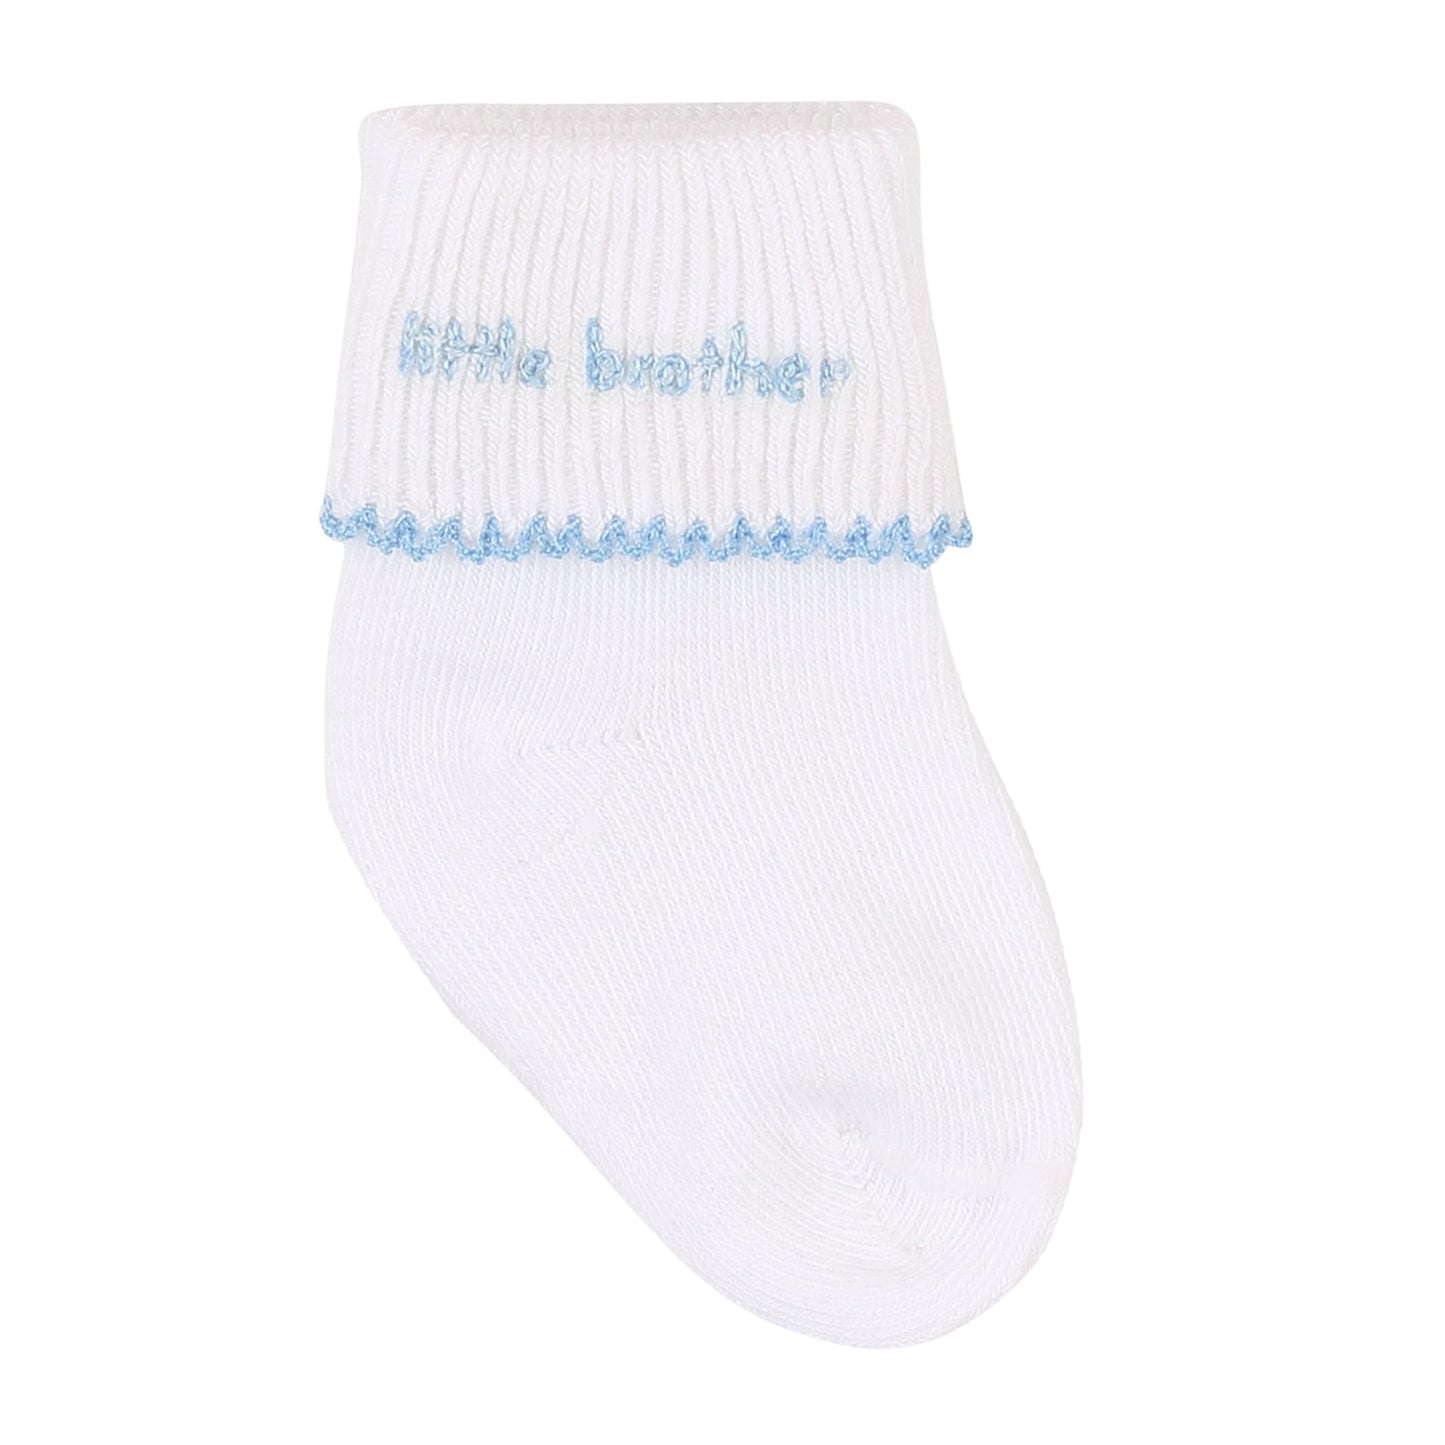 Magnolia Baby Little Brother Embroidered Socks